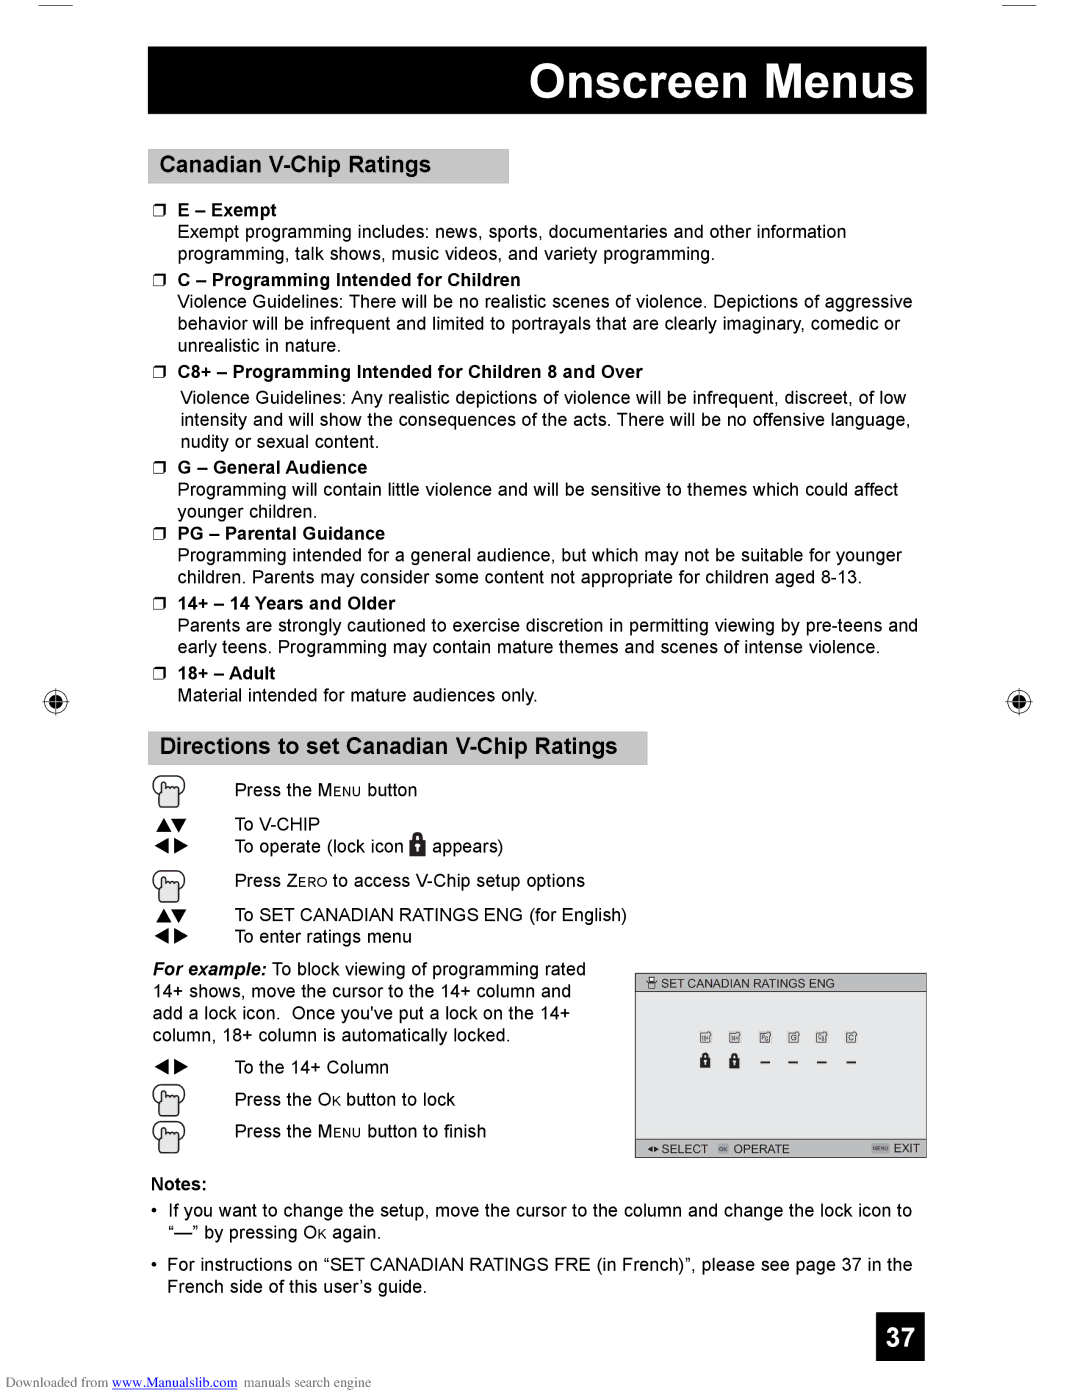 JVC HD-61G587 manual Directions to set Canadian V-Chip Ratings 